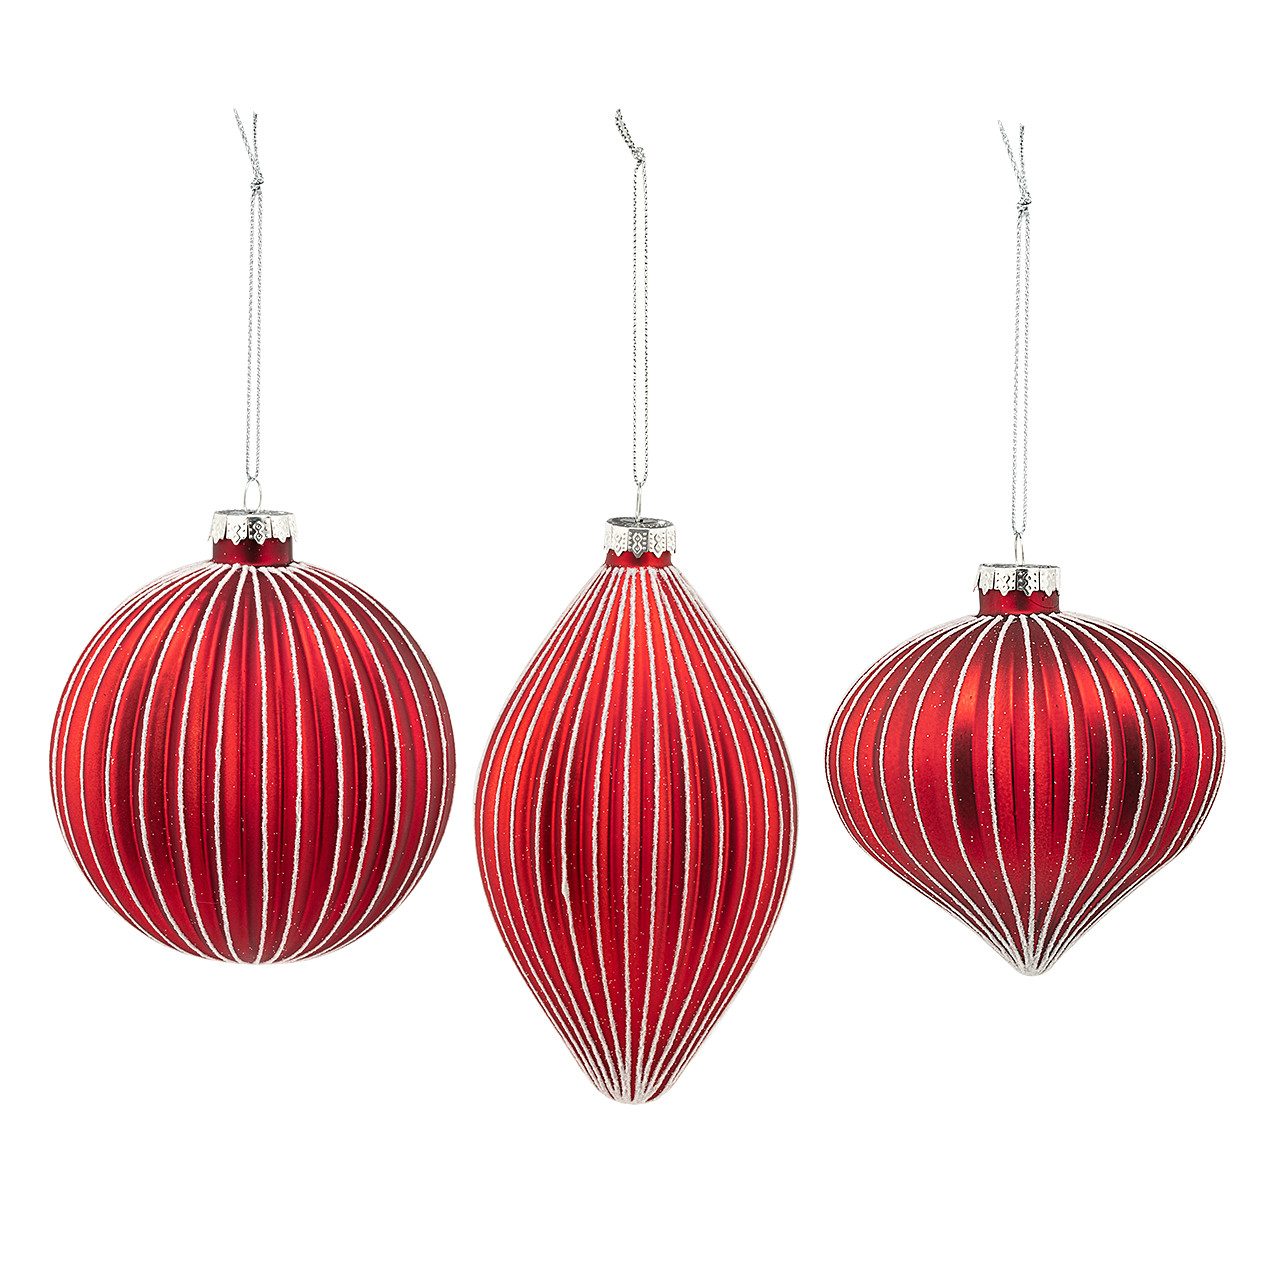 In-Store Only - Red and Silver Onion Ball Ornaments, Set of 3 